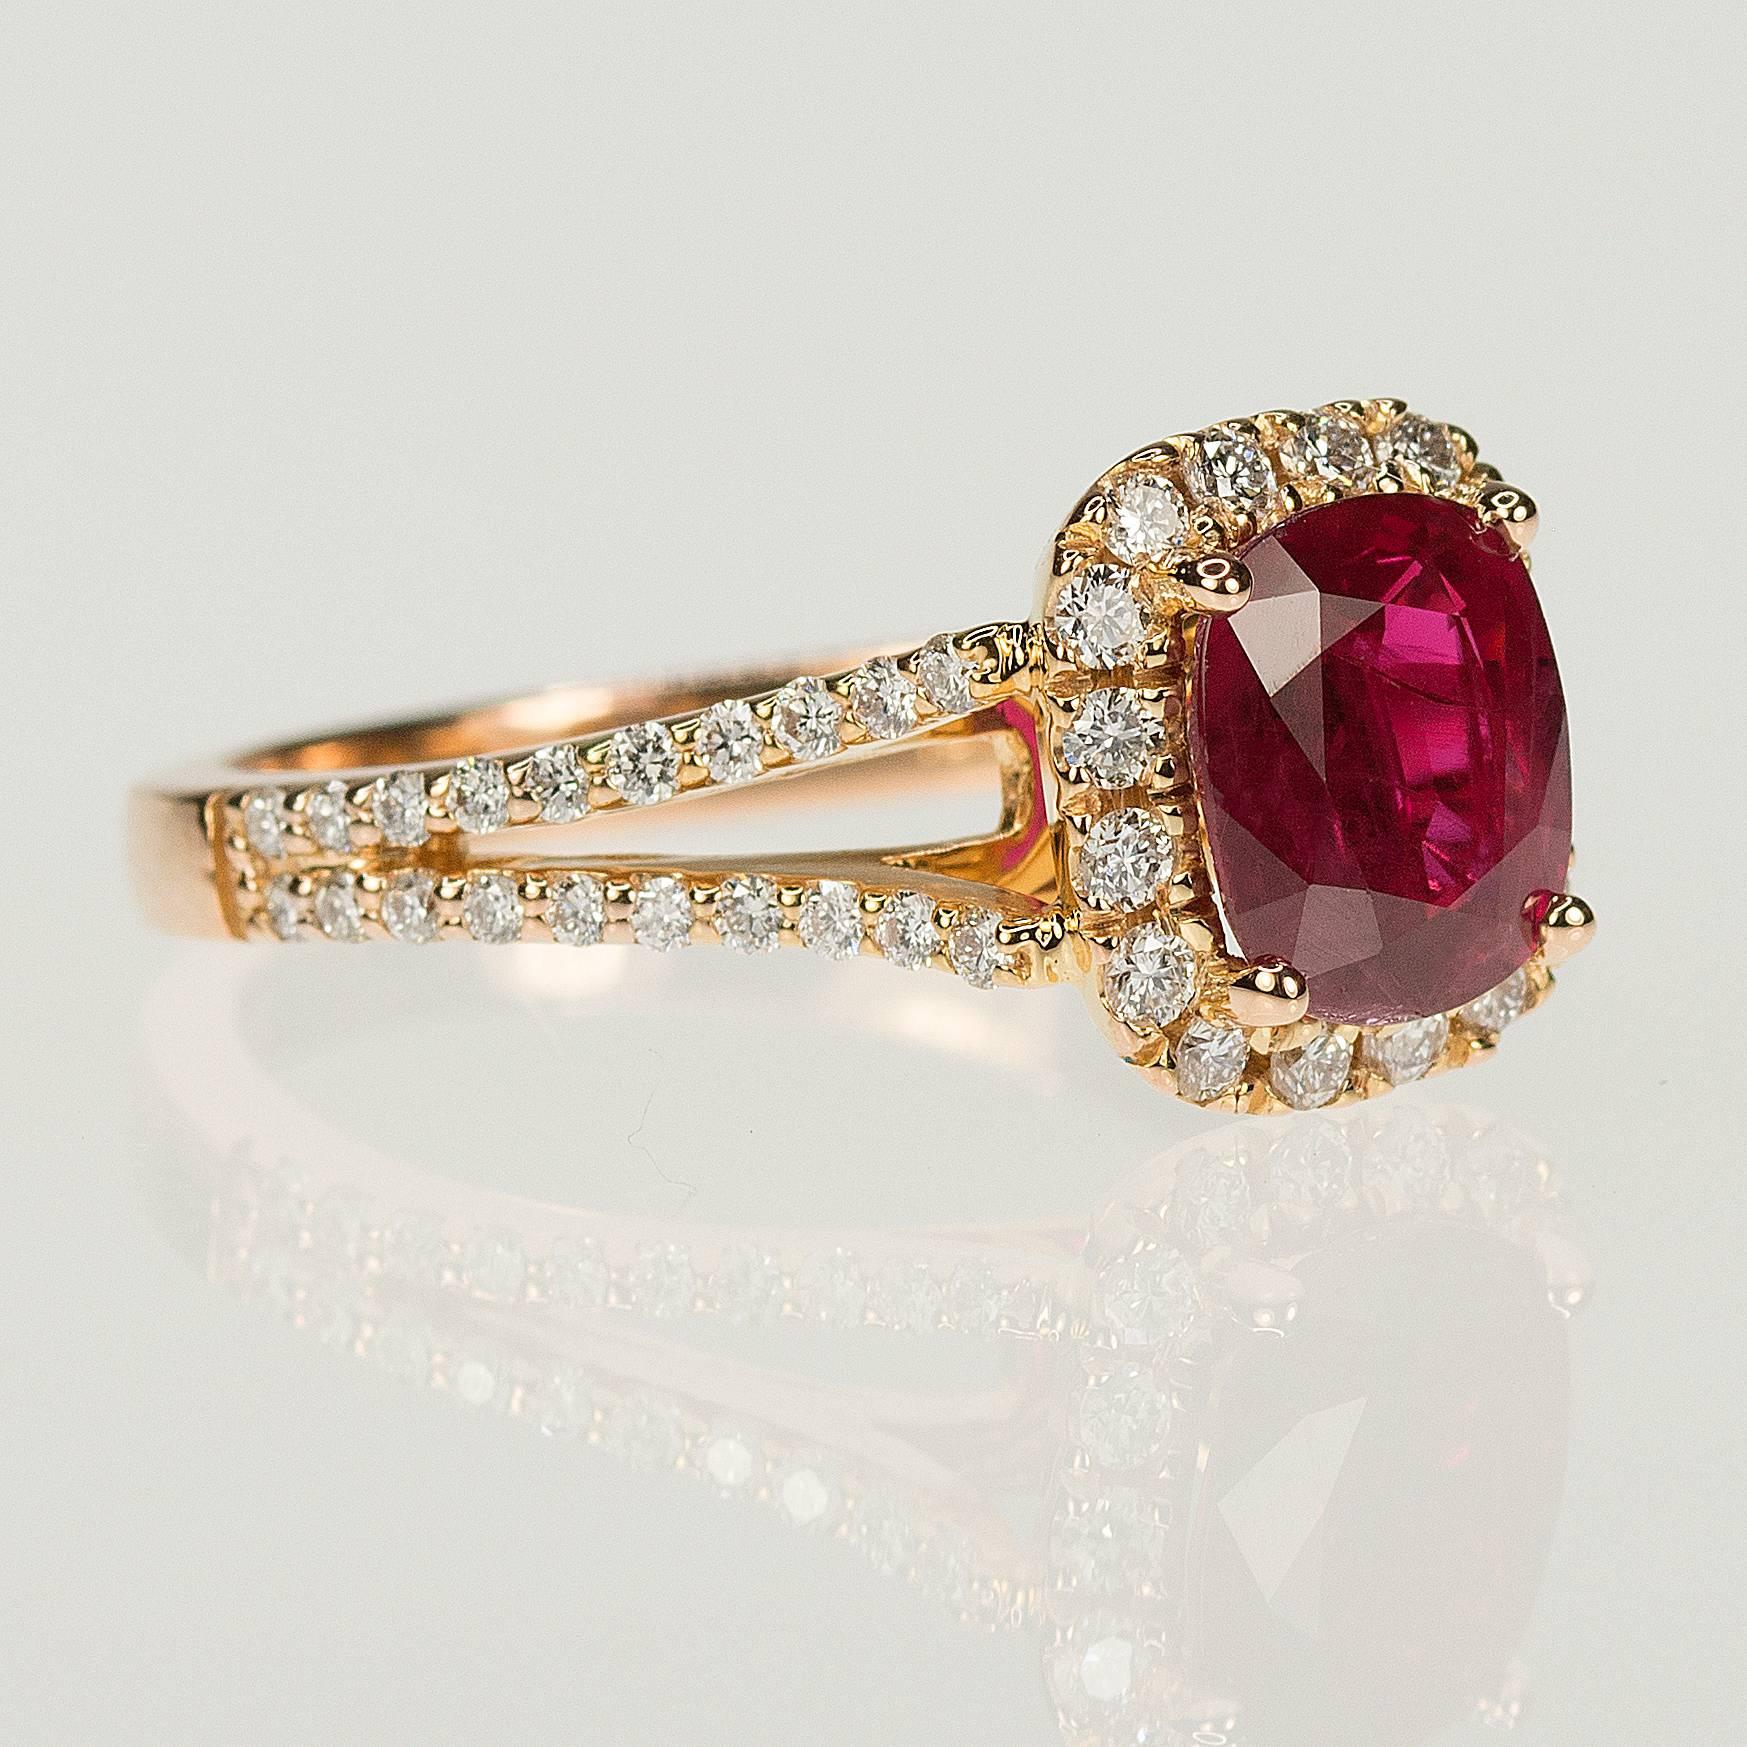 18k Rose Gold Ring with one AGL certified 1.65 carat cushion cut ruby and 56 round brilliant diamonds weighing 0.49 carats.